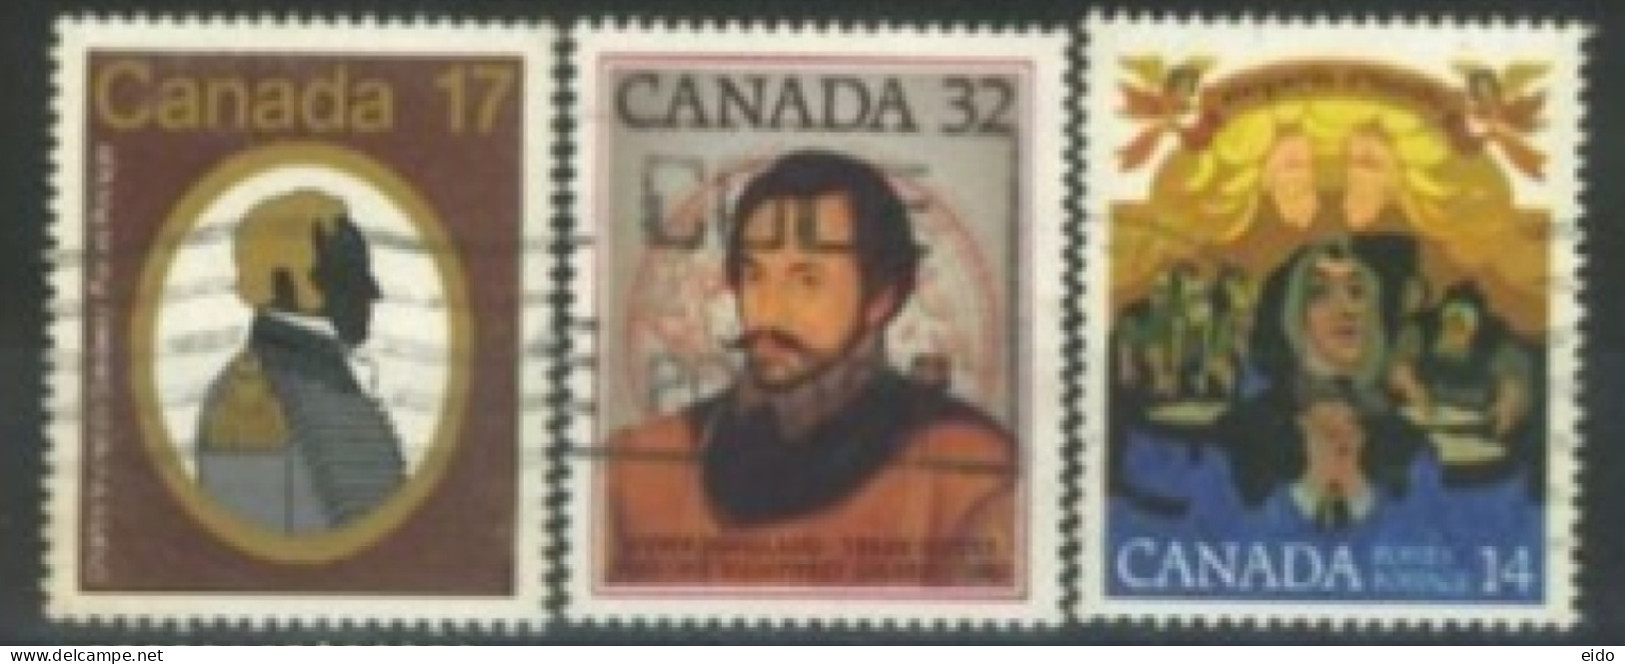 CANADA - 1978/83, MARGUERITE D'YOUVILLE COMMEMORATION, CHARLES MICHEL & SIR HUMPHREY. STAMPS SET OF 3, USED. - Used Stamps